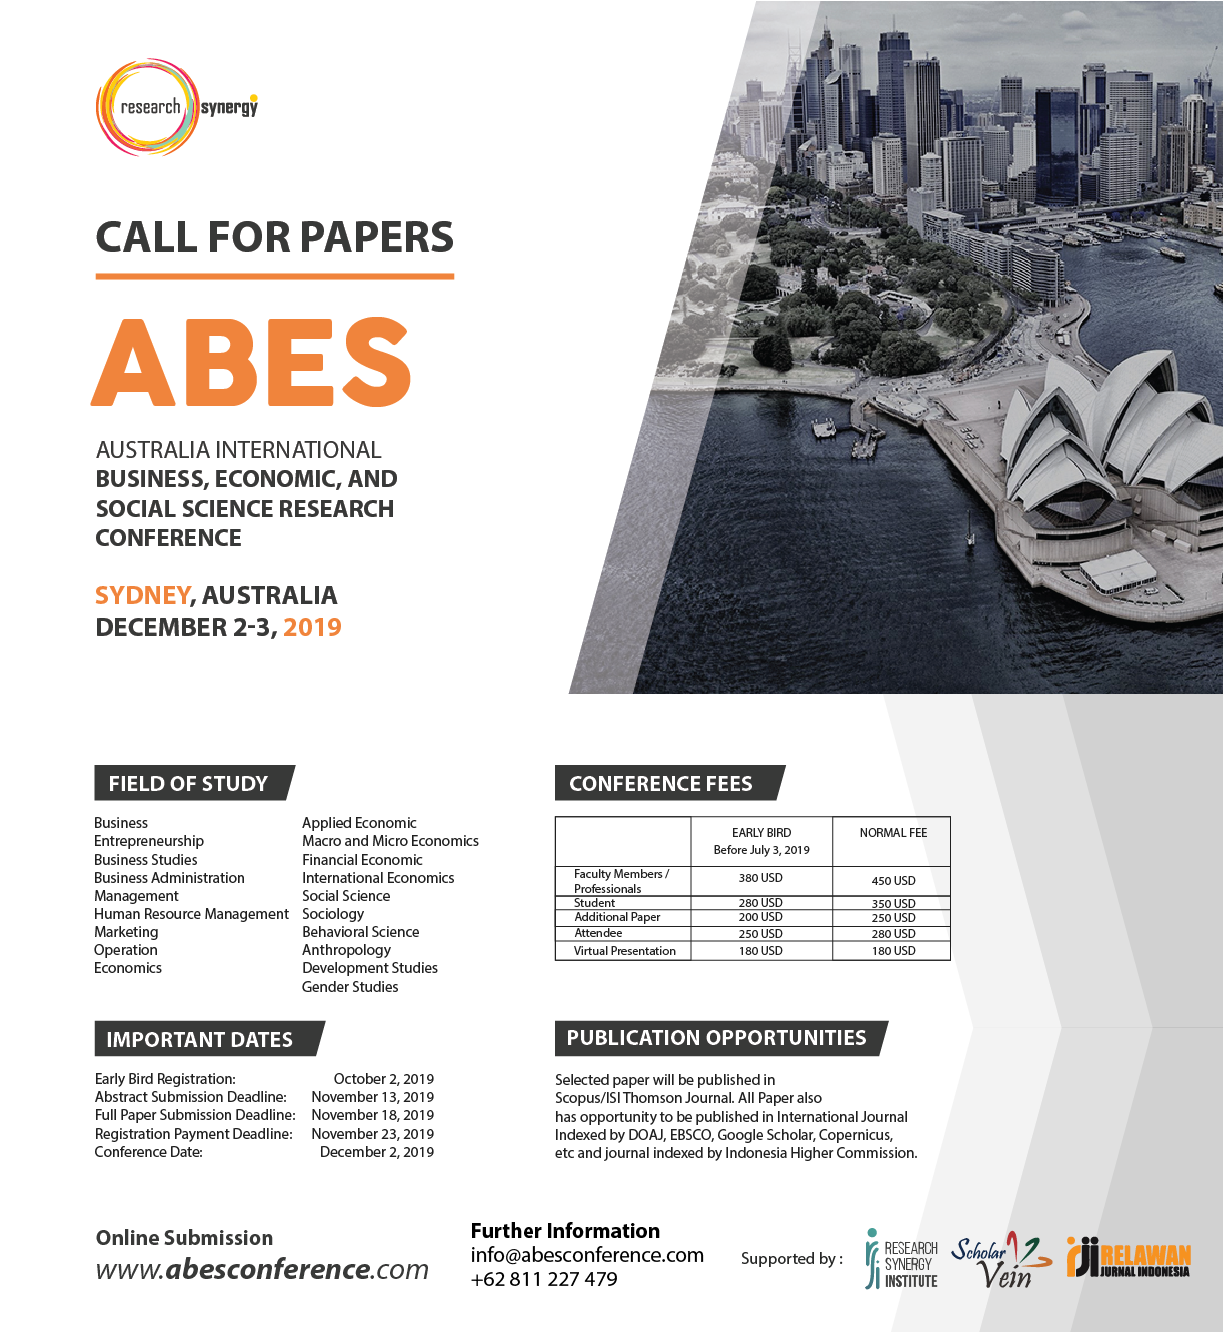 Australia International Business, Economic, and Social Science Research Conference (ABES)